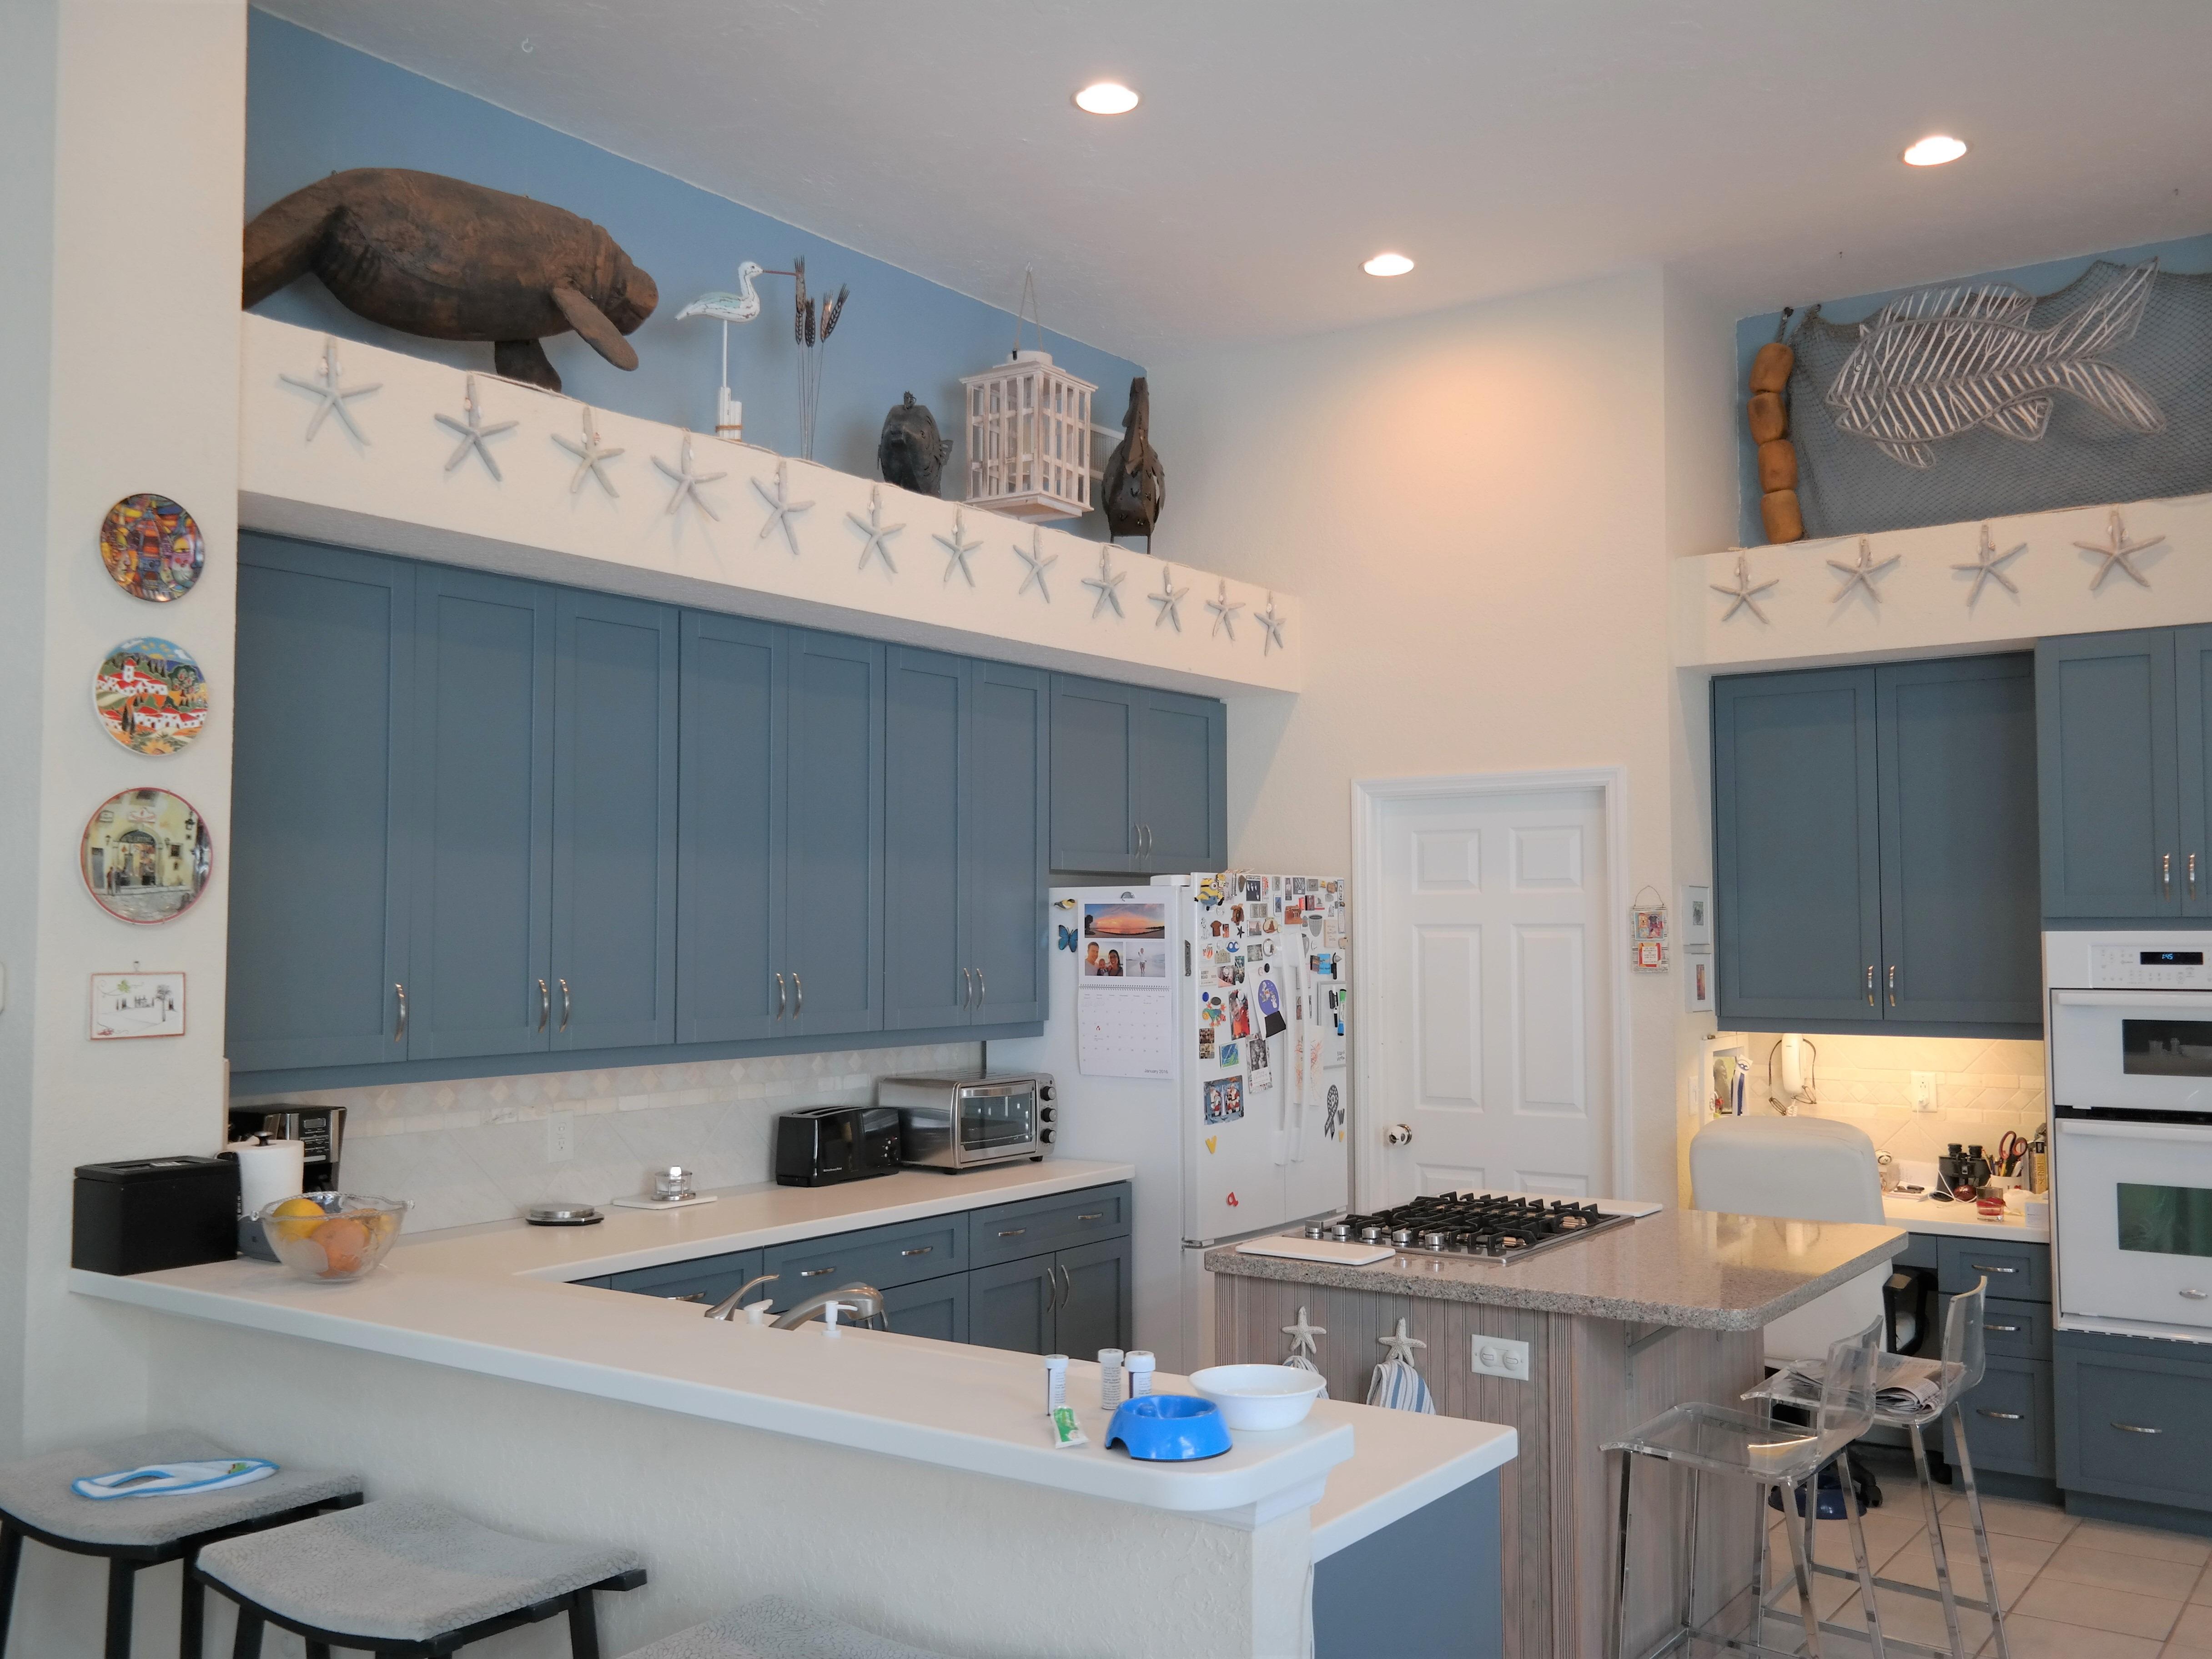 Re-A-Door Kitchen Cabinets Refacing Tampa Beautiful beach water blue kitchen cabinet doors and cabinet refacing in Tampa, Florida, perfect for a summer-style beach home.